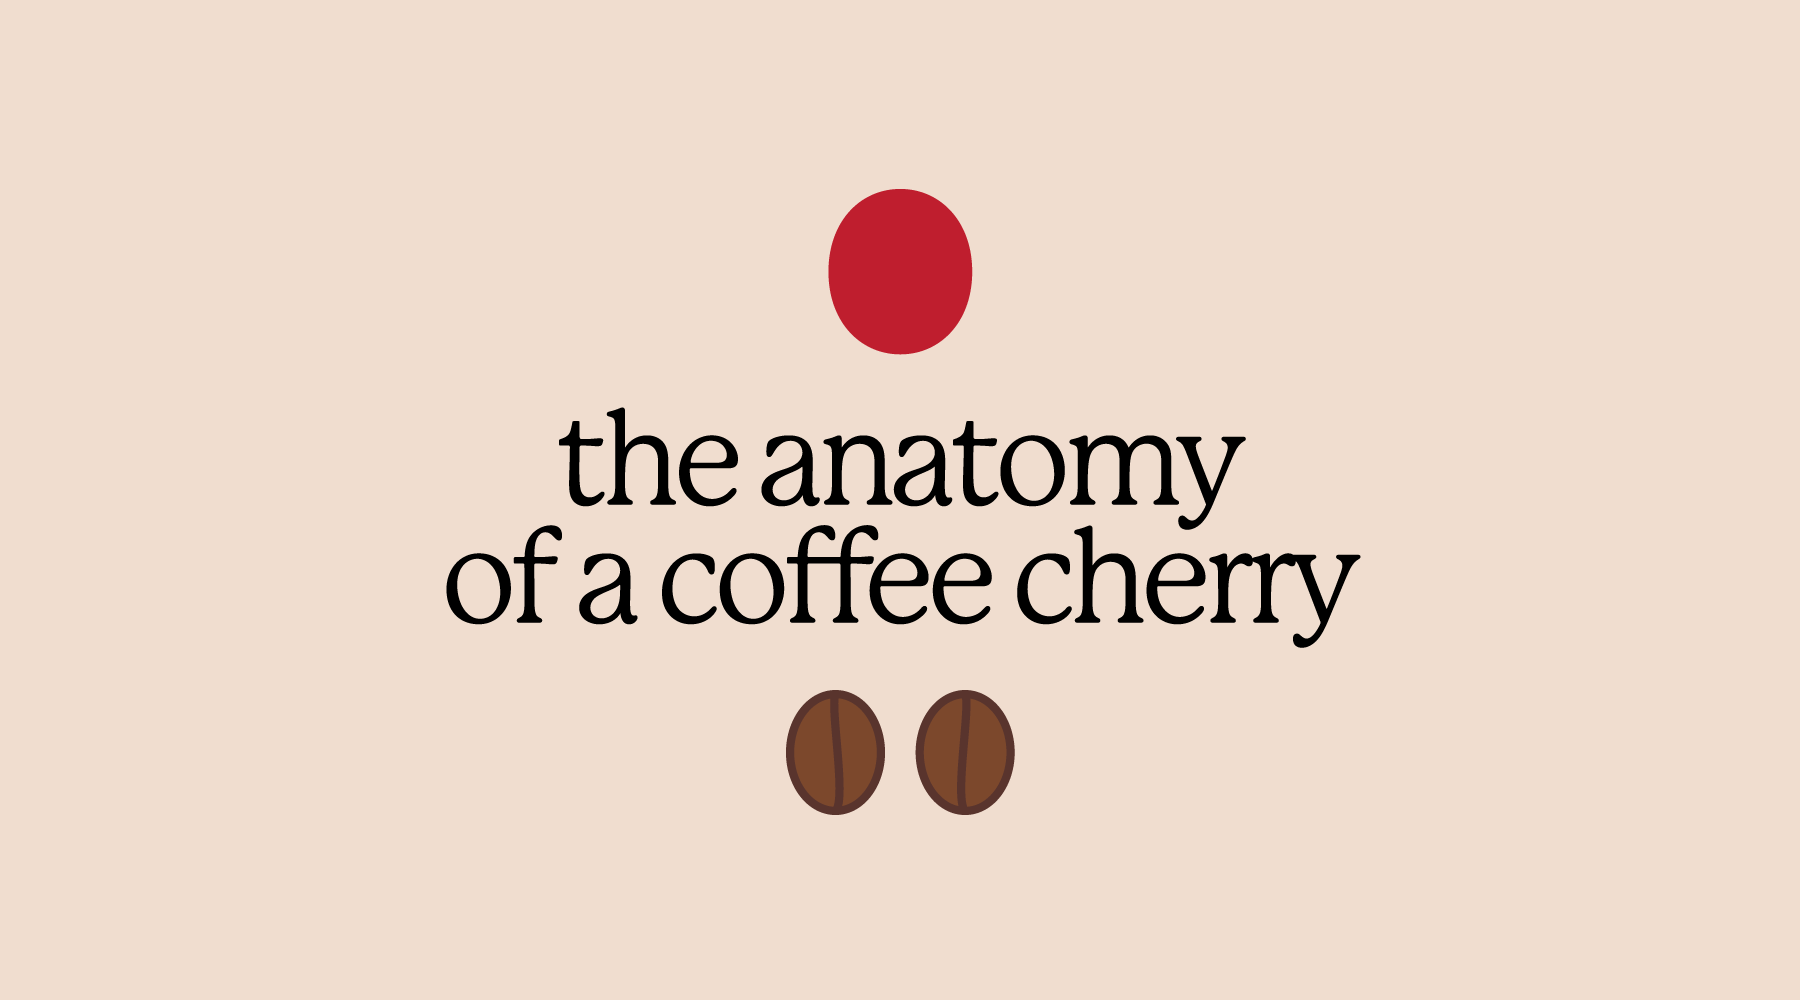 Breaking Down the Anatomy of a Coffee Cherry